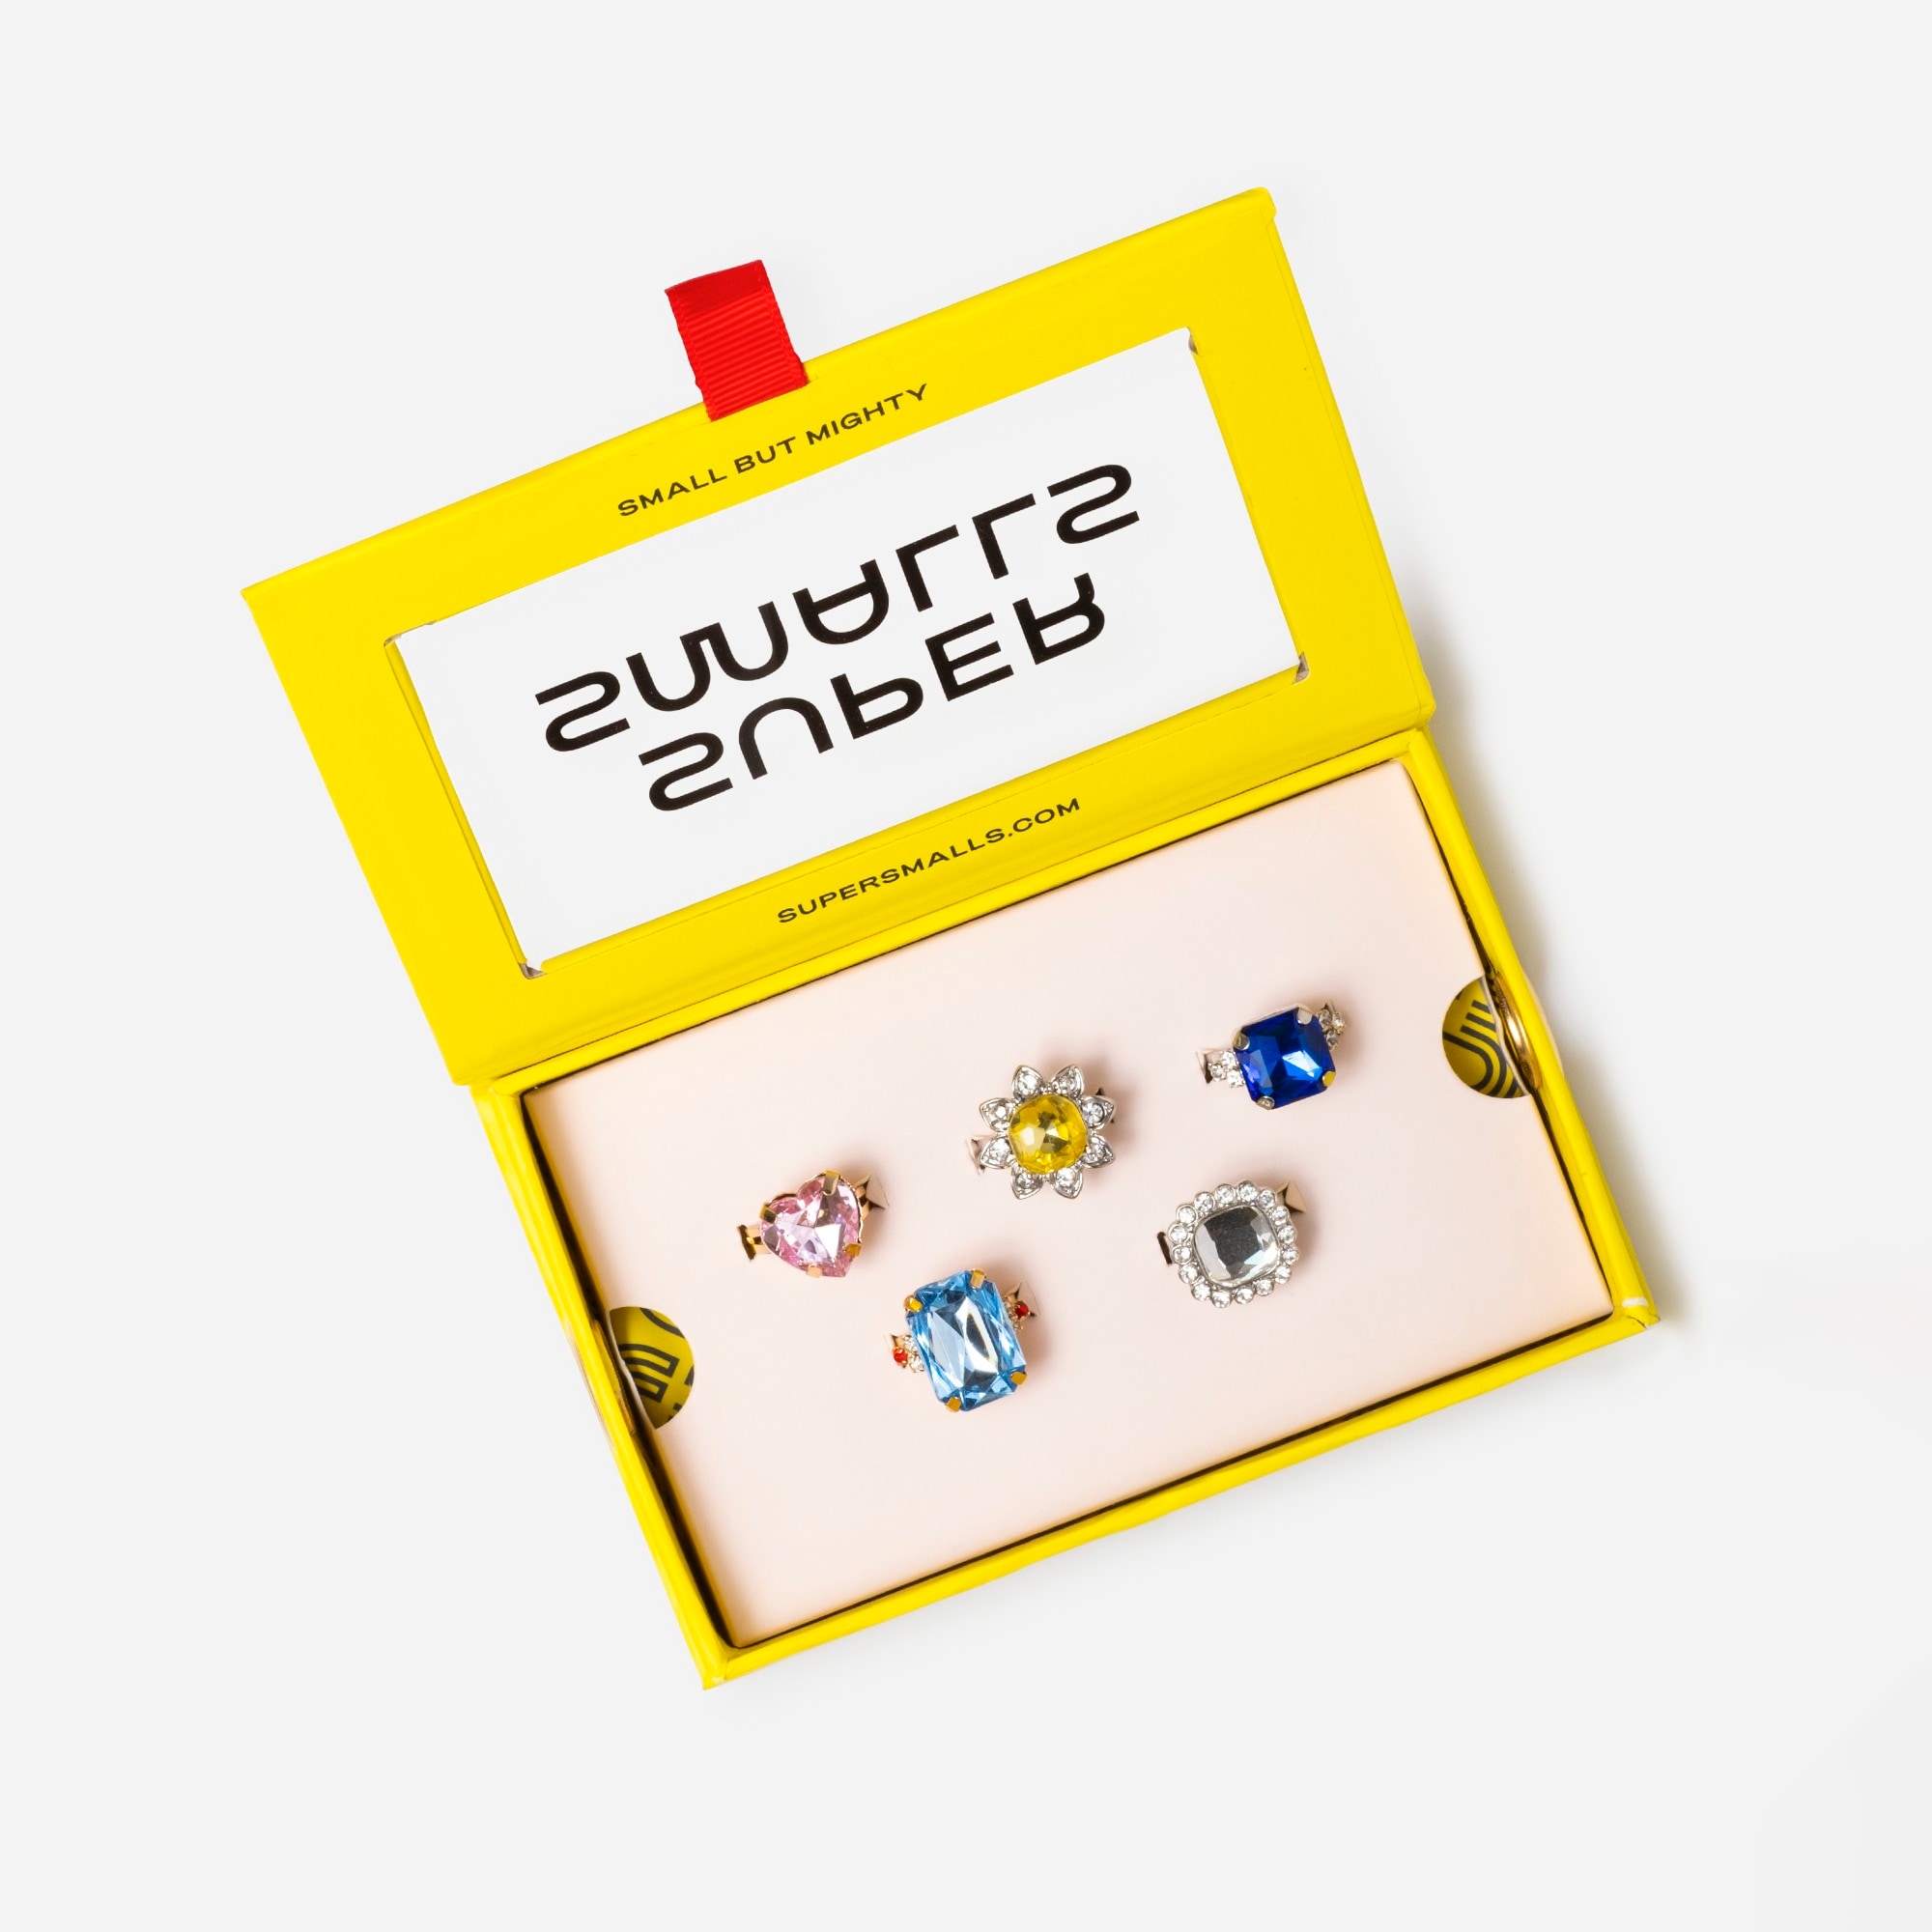  Super Smalls power lunch rings set